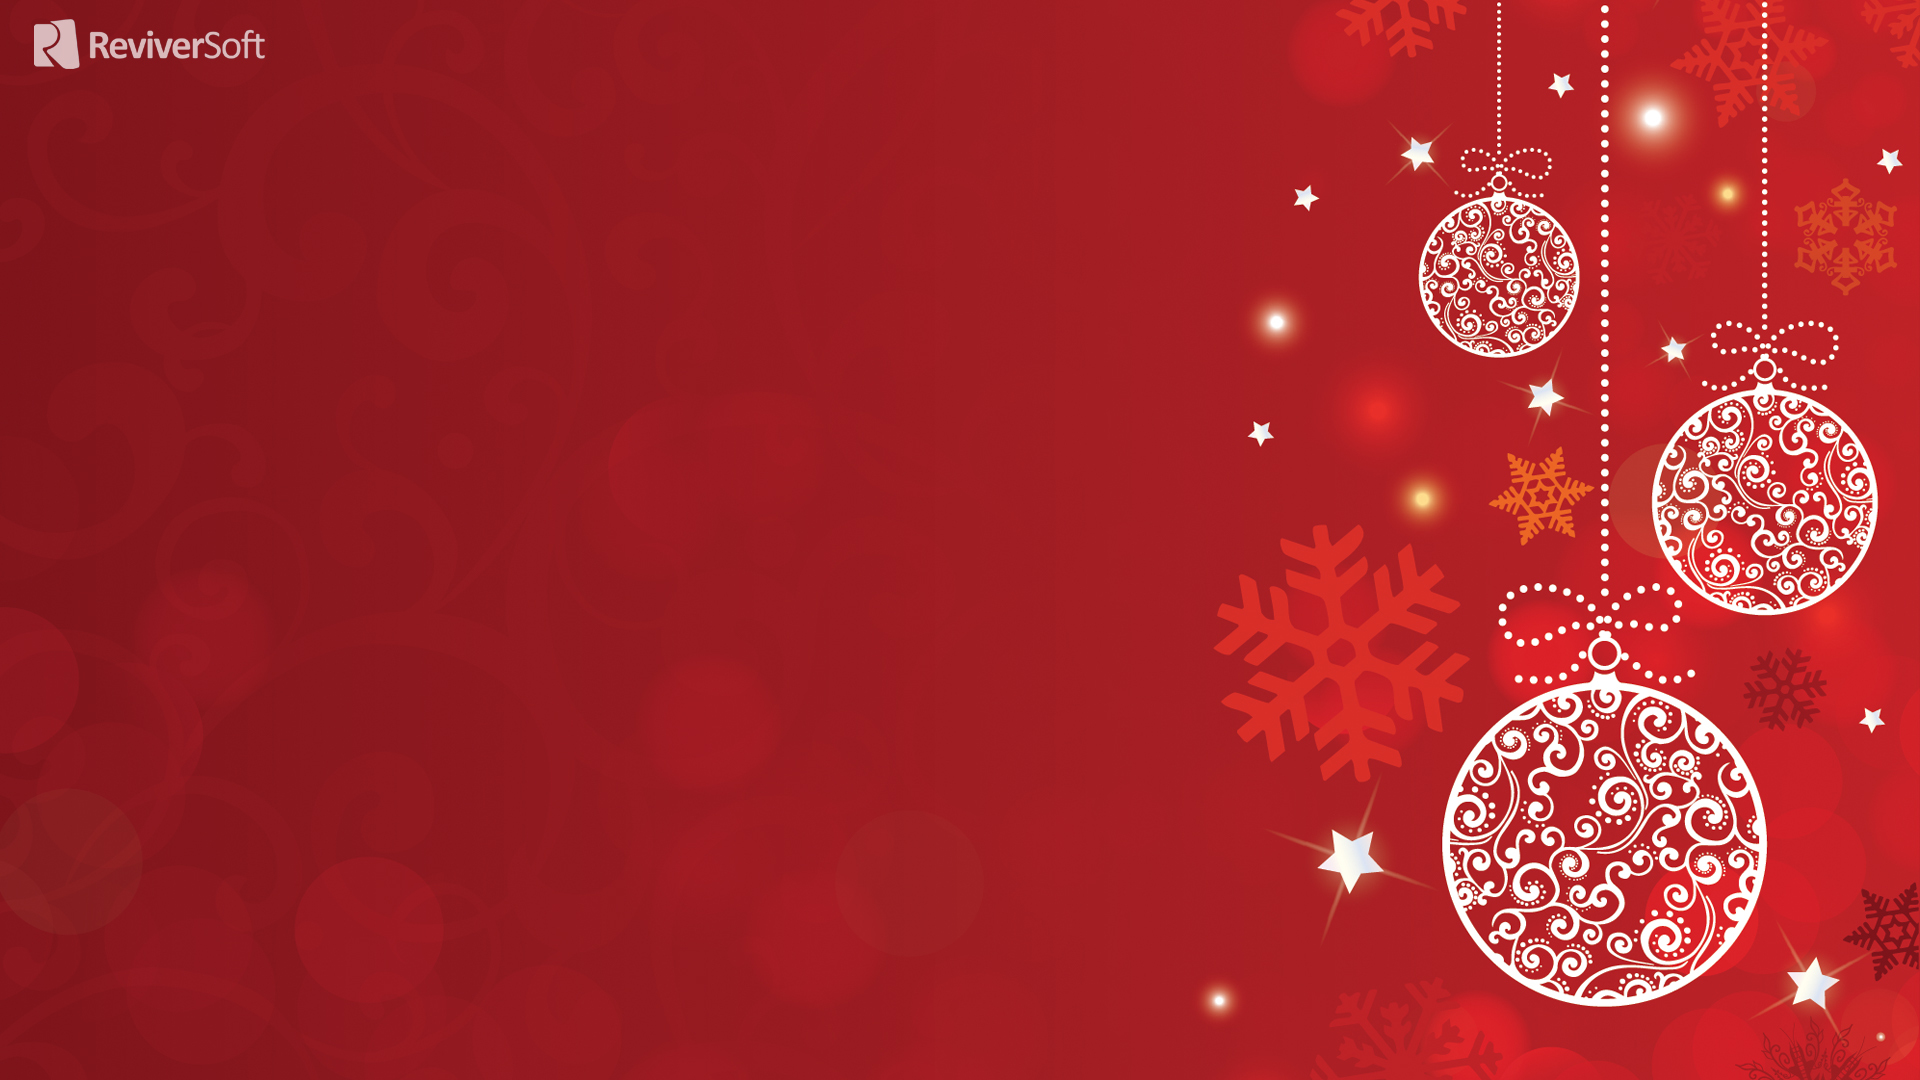 White Christmas Decorations On A Red Background